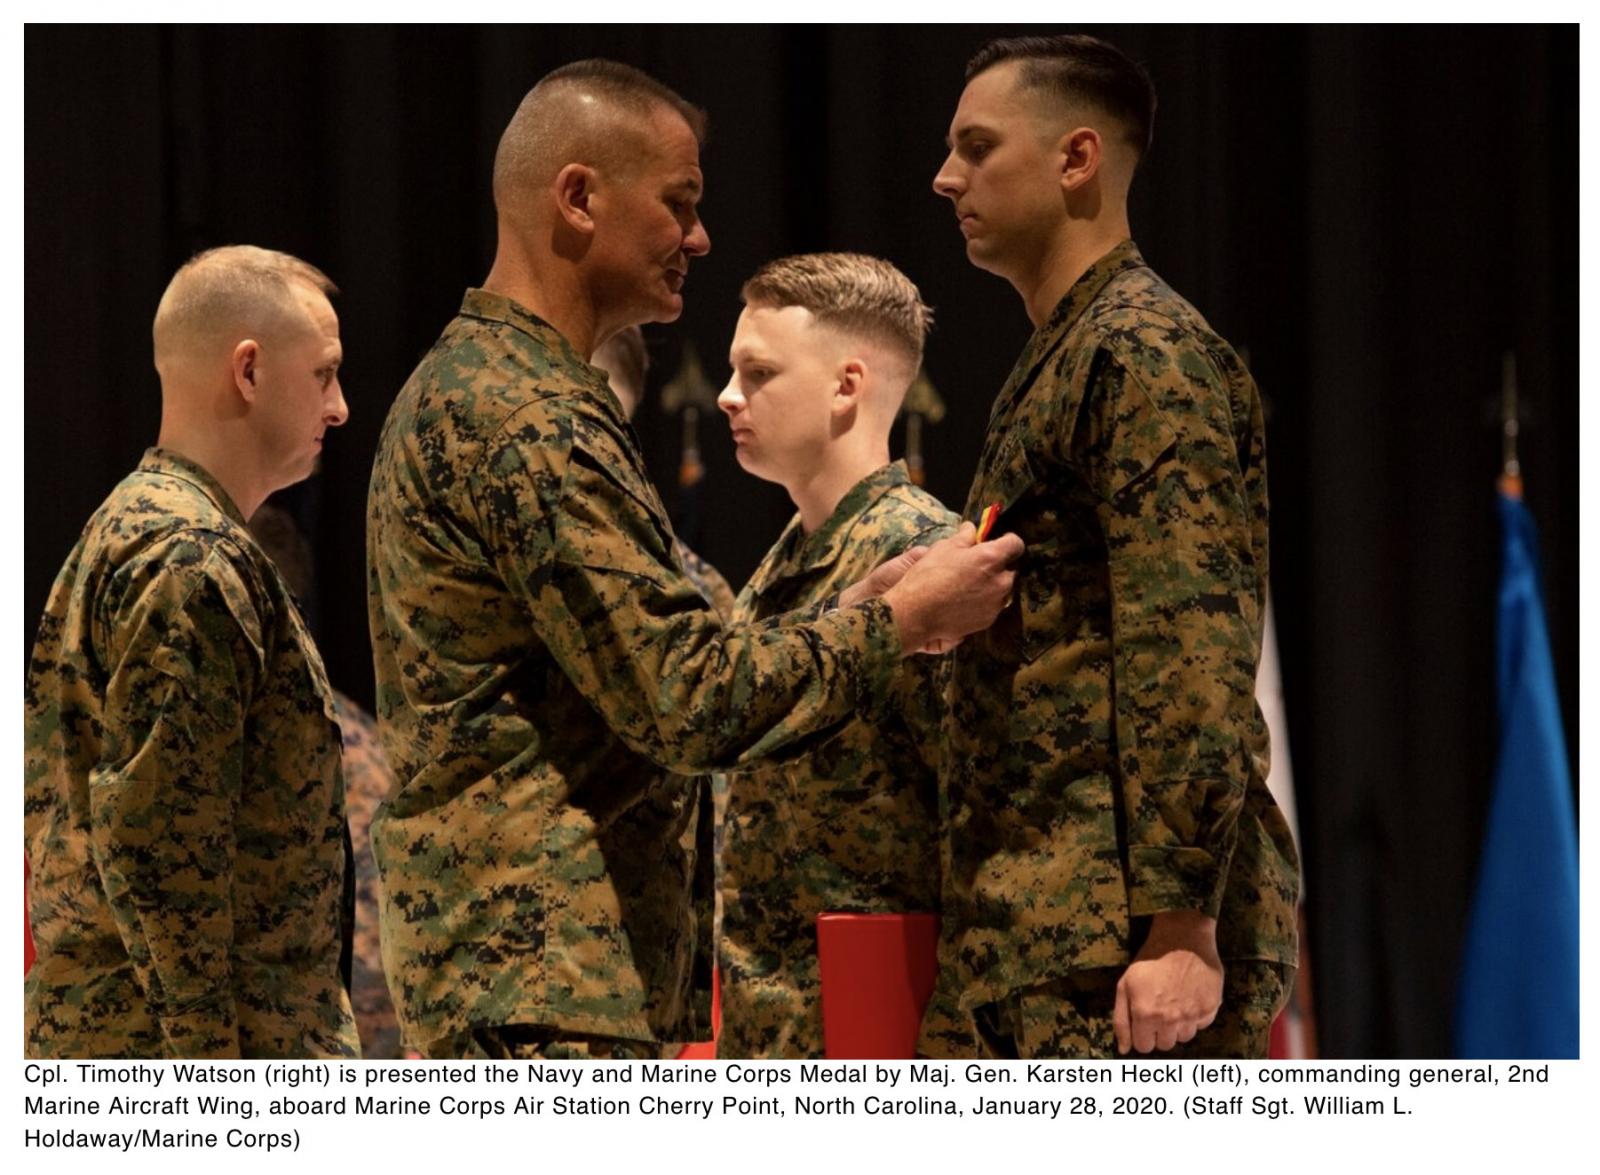  Four Marines receive rare medal for rescuing drowning mother, daughters